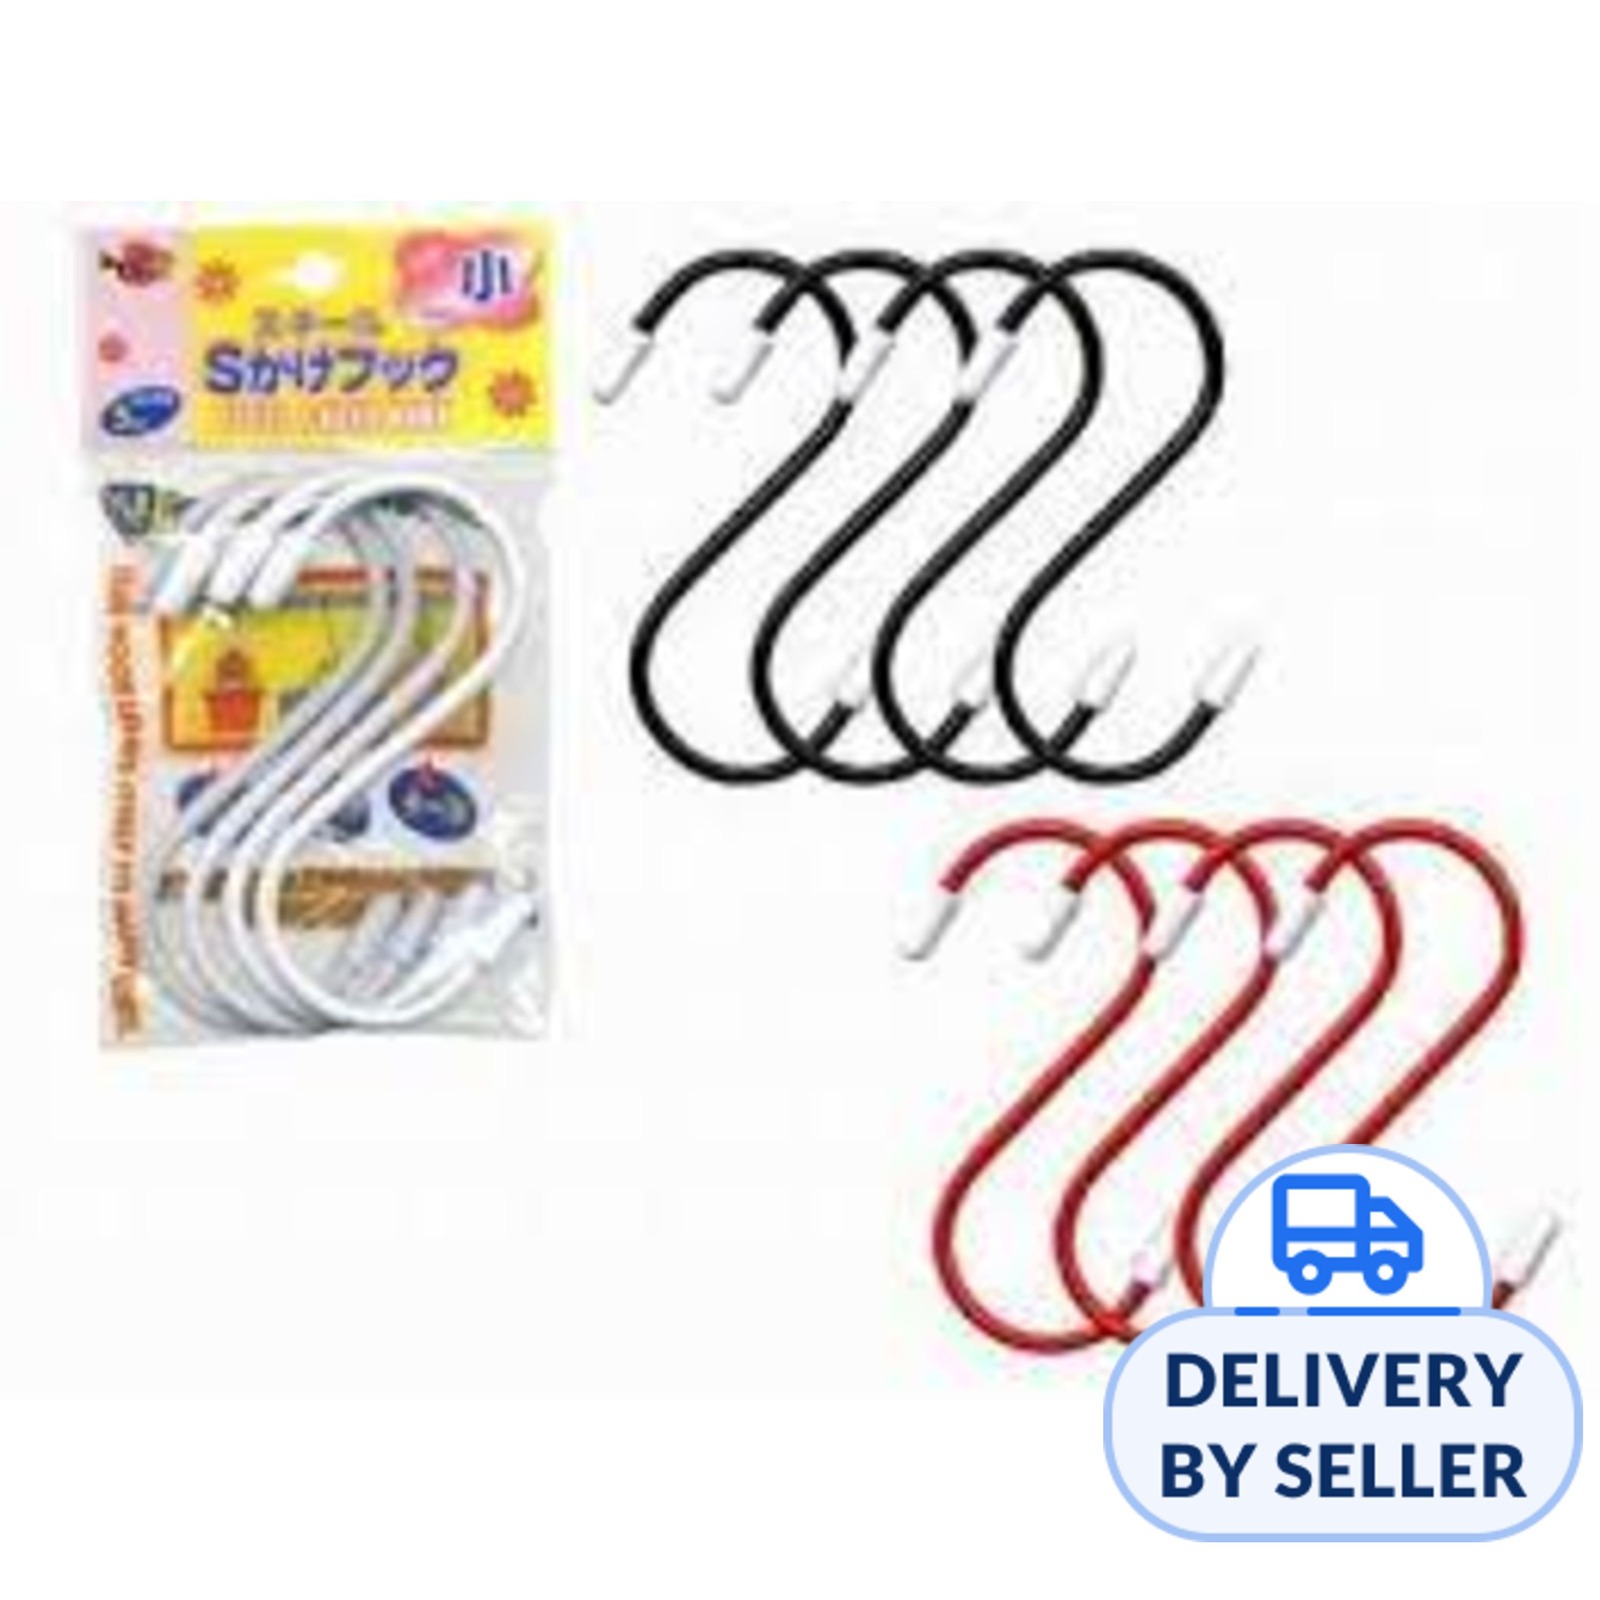 Sl Removable Cable Hook Medium SL5033 - 9PPP - Eezee